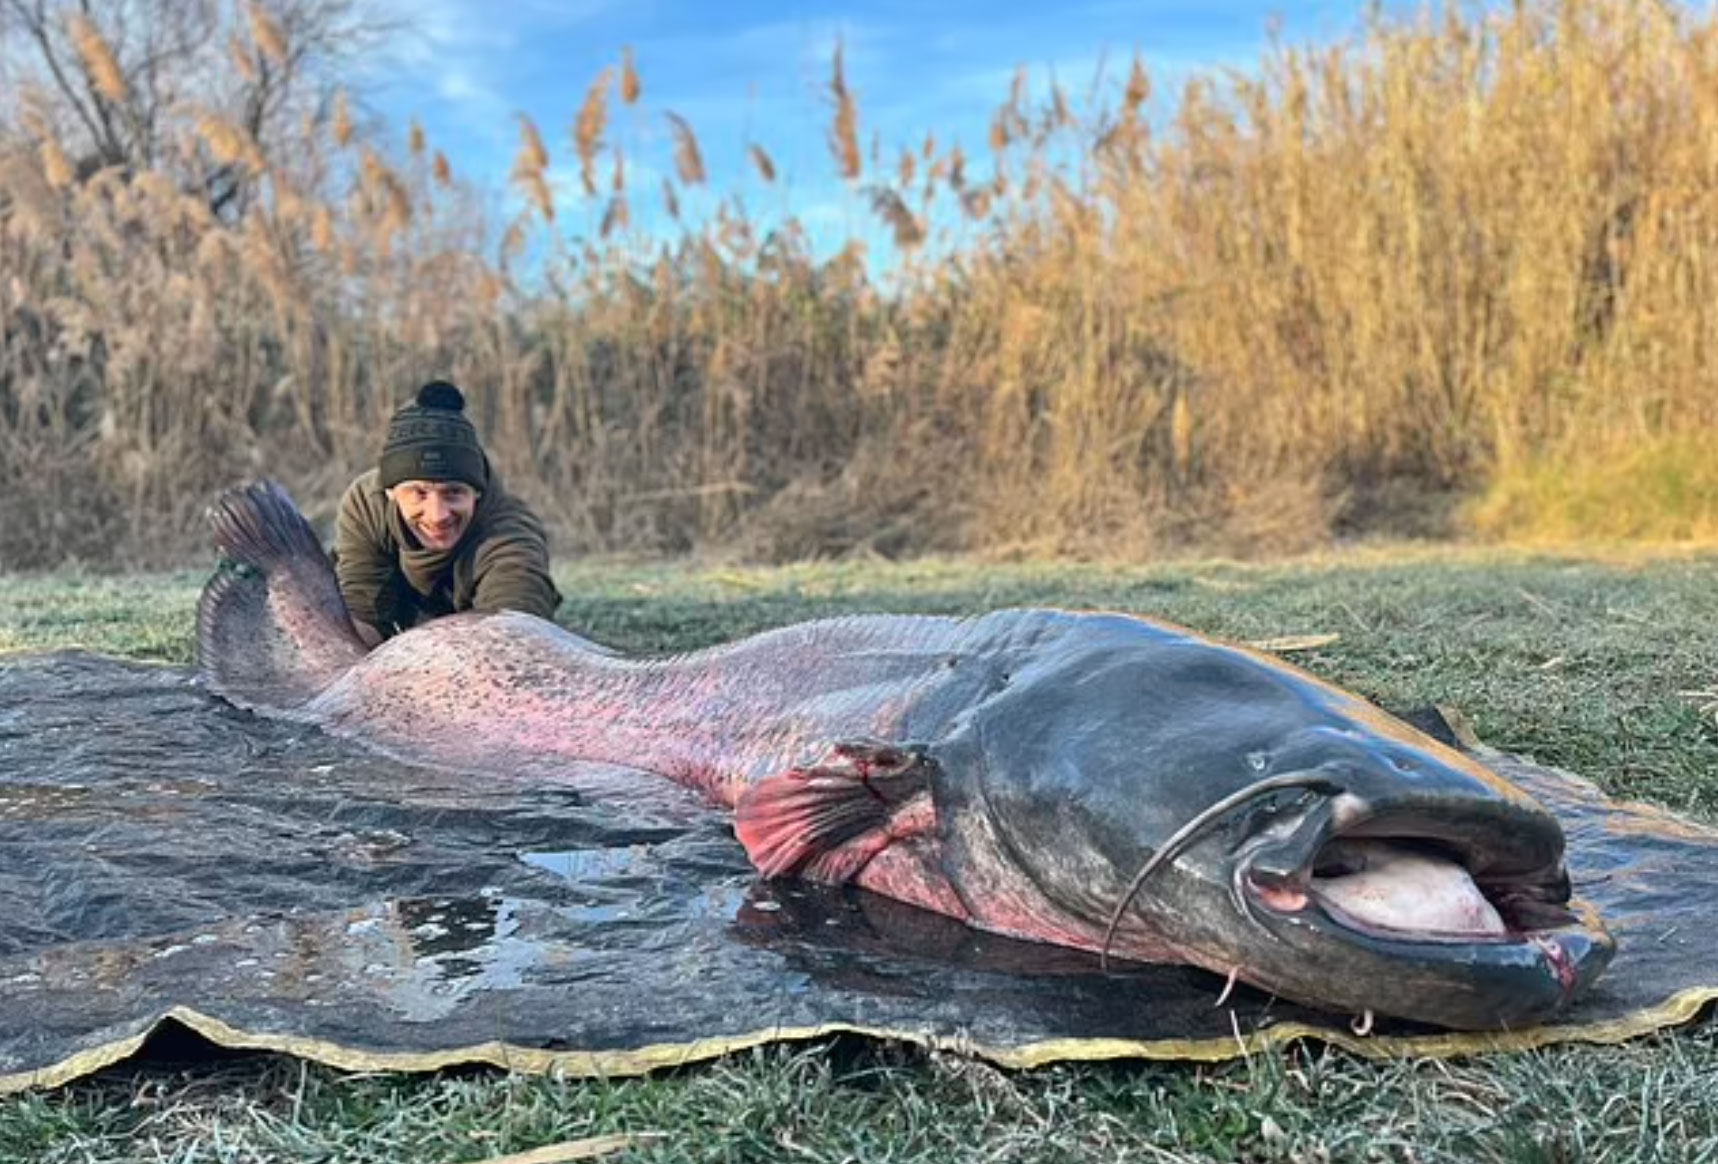 220-Pound Wels Catfish Tows Angler for a Mile Down the River Ebro